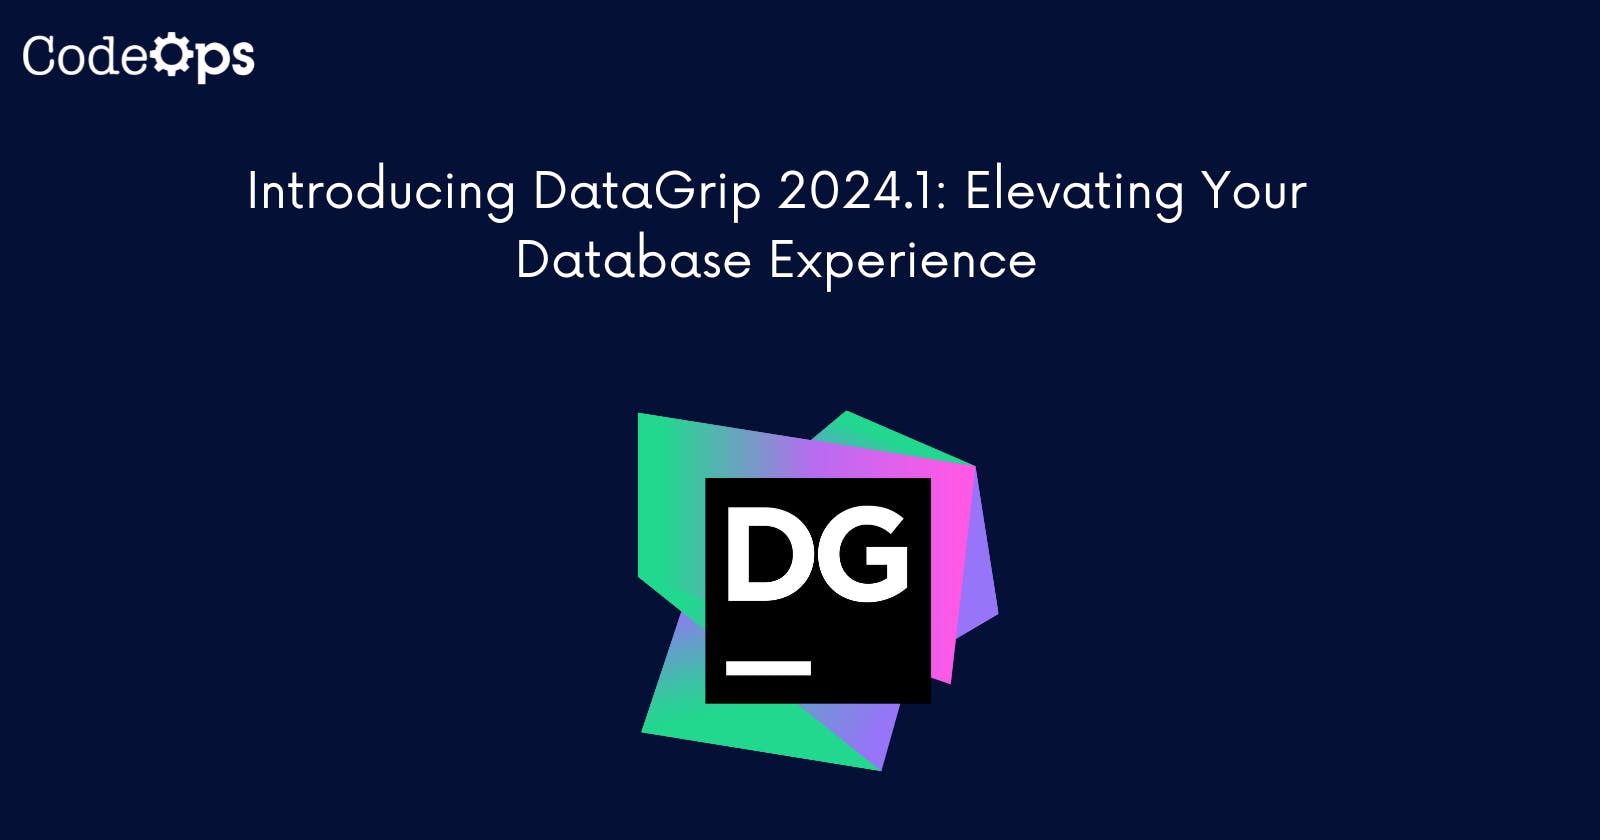 Introducing DataGrip 2024.1: Elevating Your Database Experience